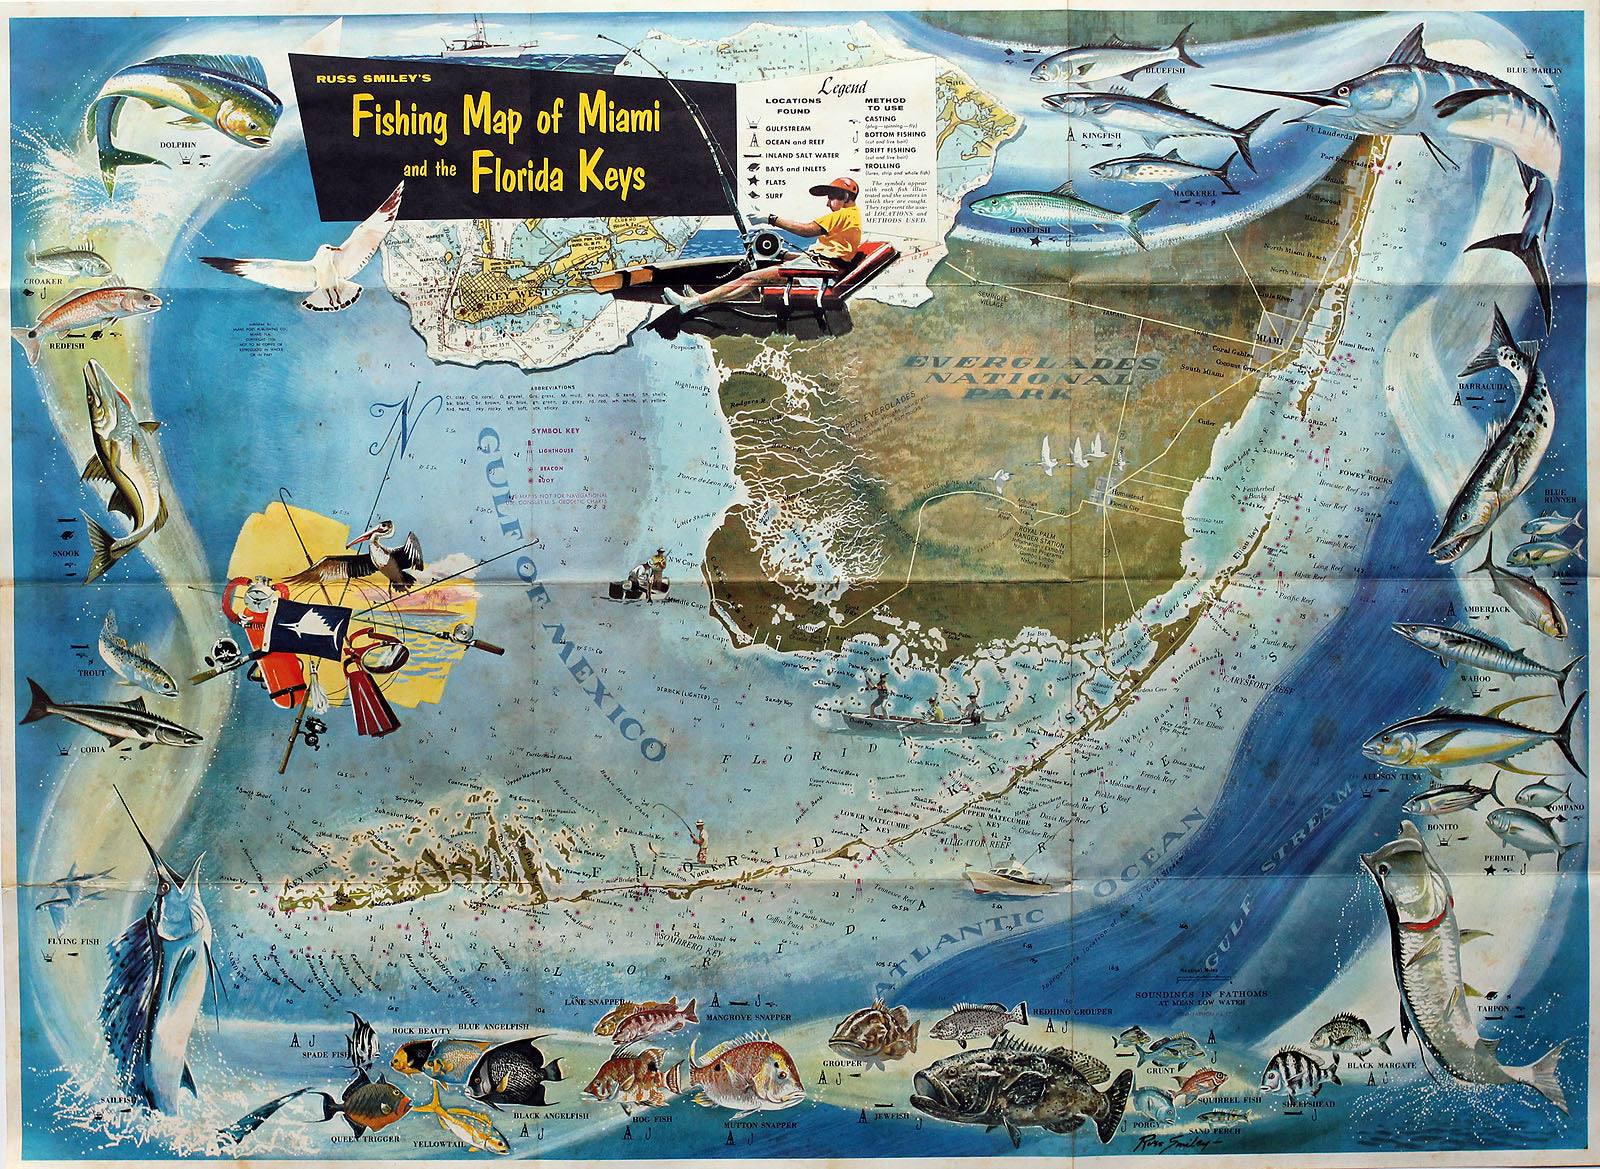 (FL. - southern) Fishing Map of Miami...